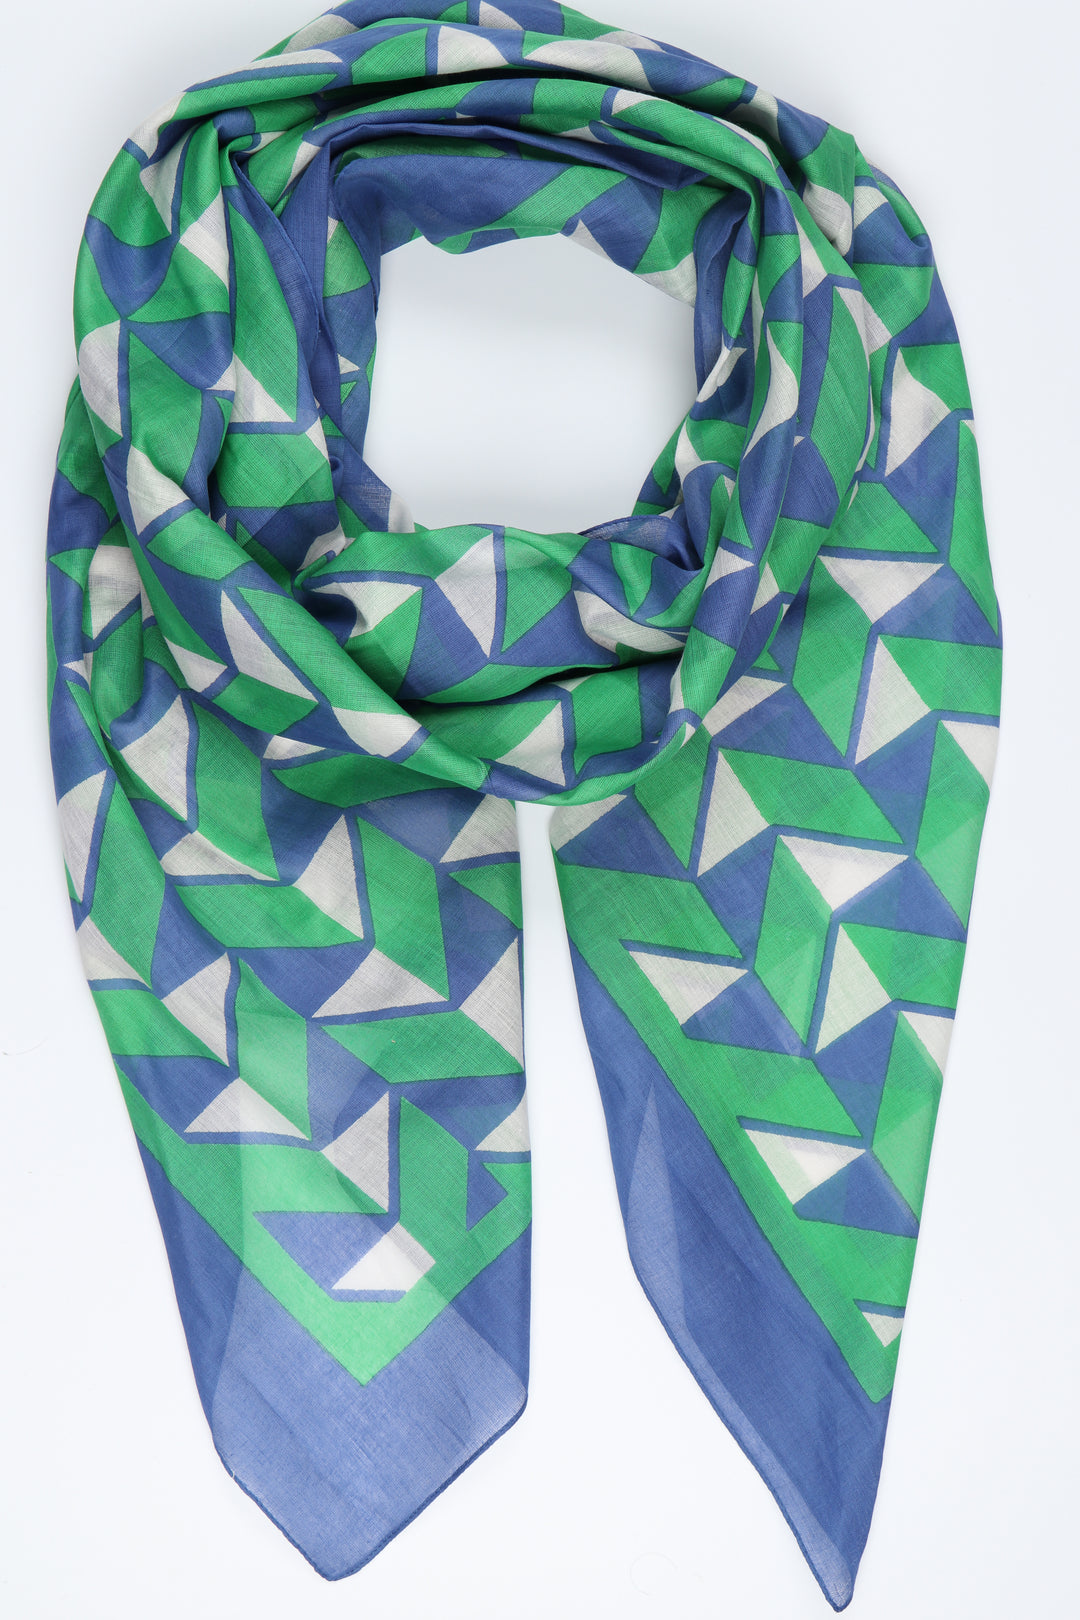 blue and green geometric print cotton scarf with a blue bordered edge